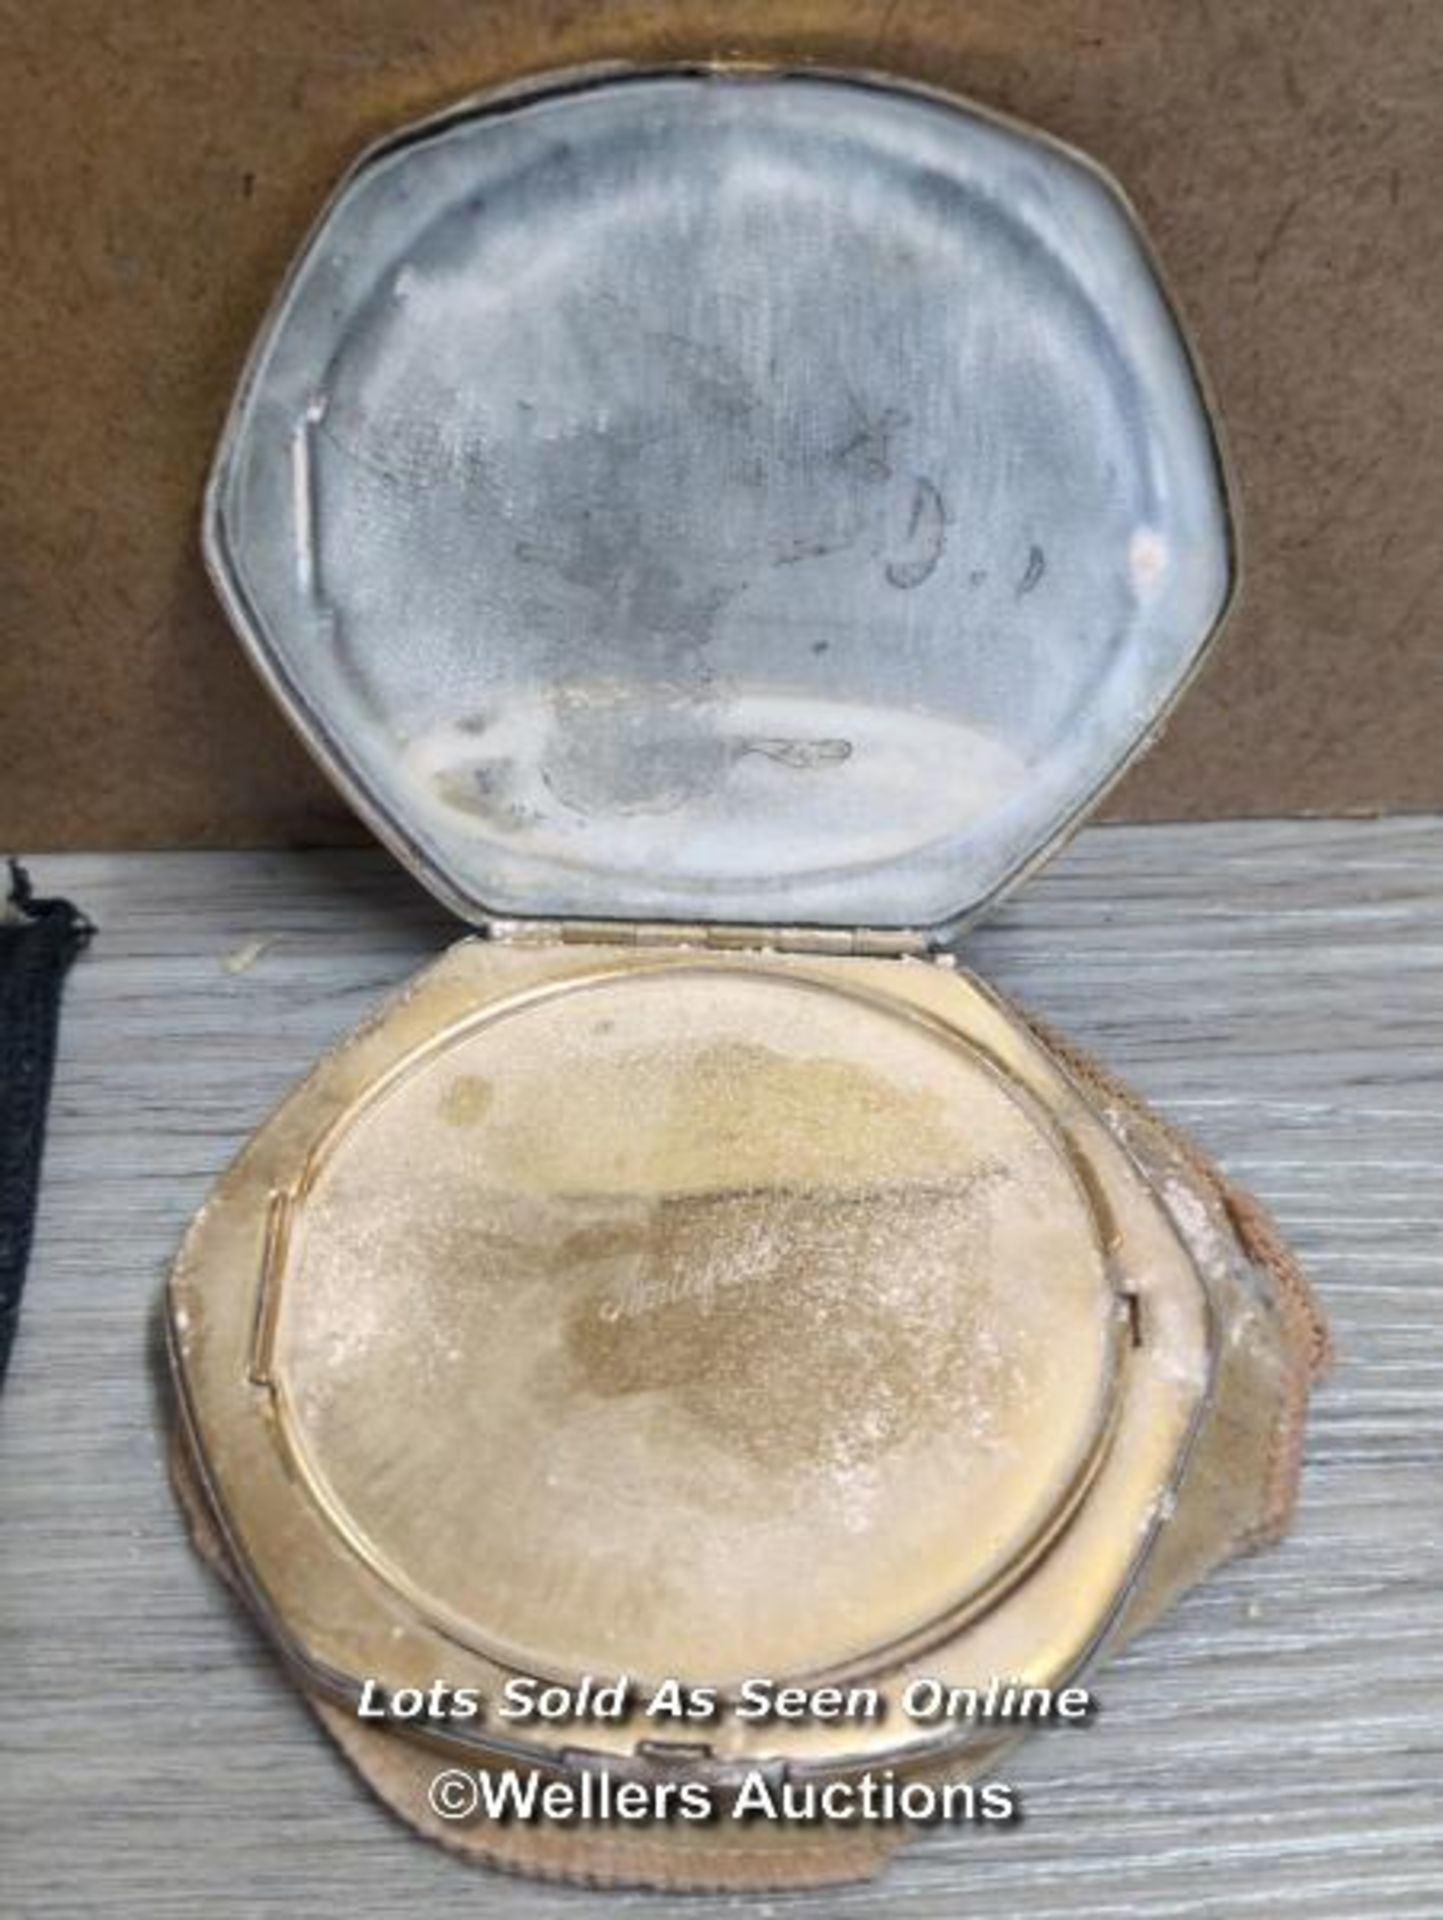 TWO VINTAGE POWDER COMPACTS - Image 4 of 5